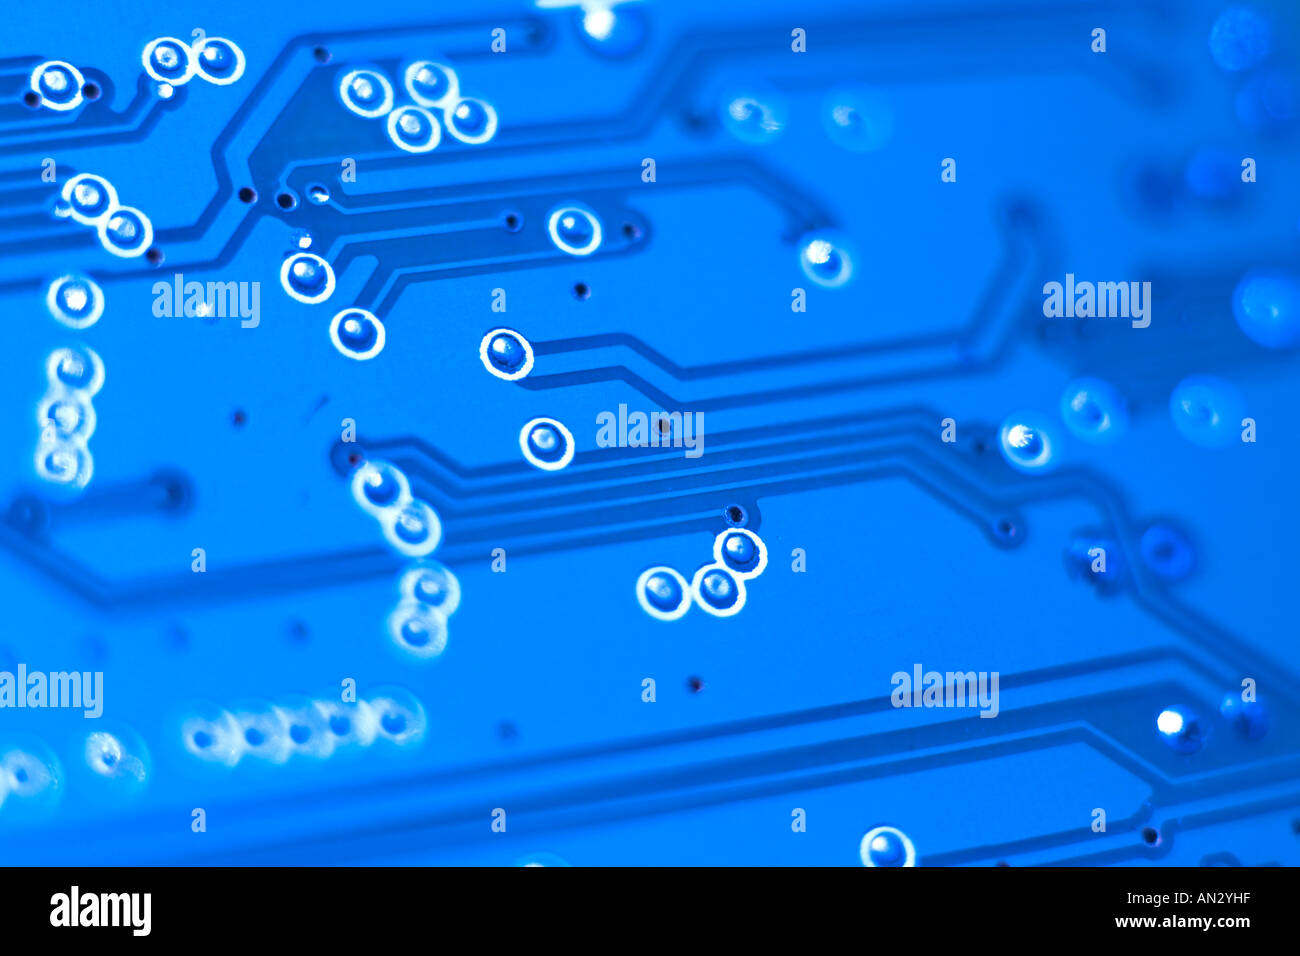 printed circuit board pattern with many vias Stock Photo